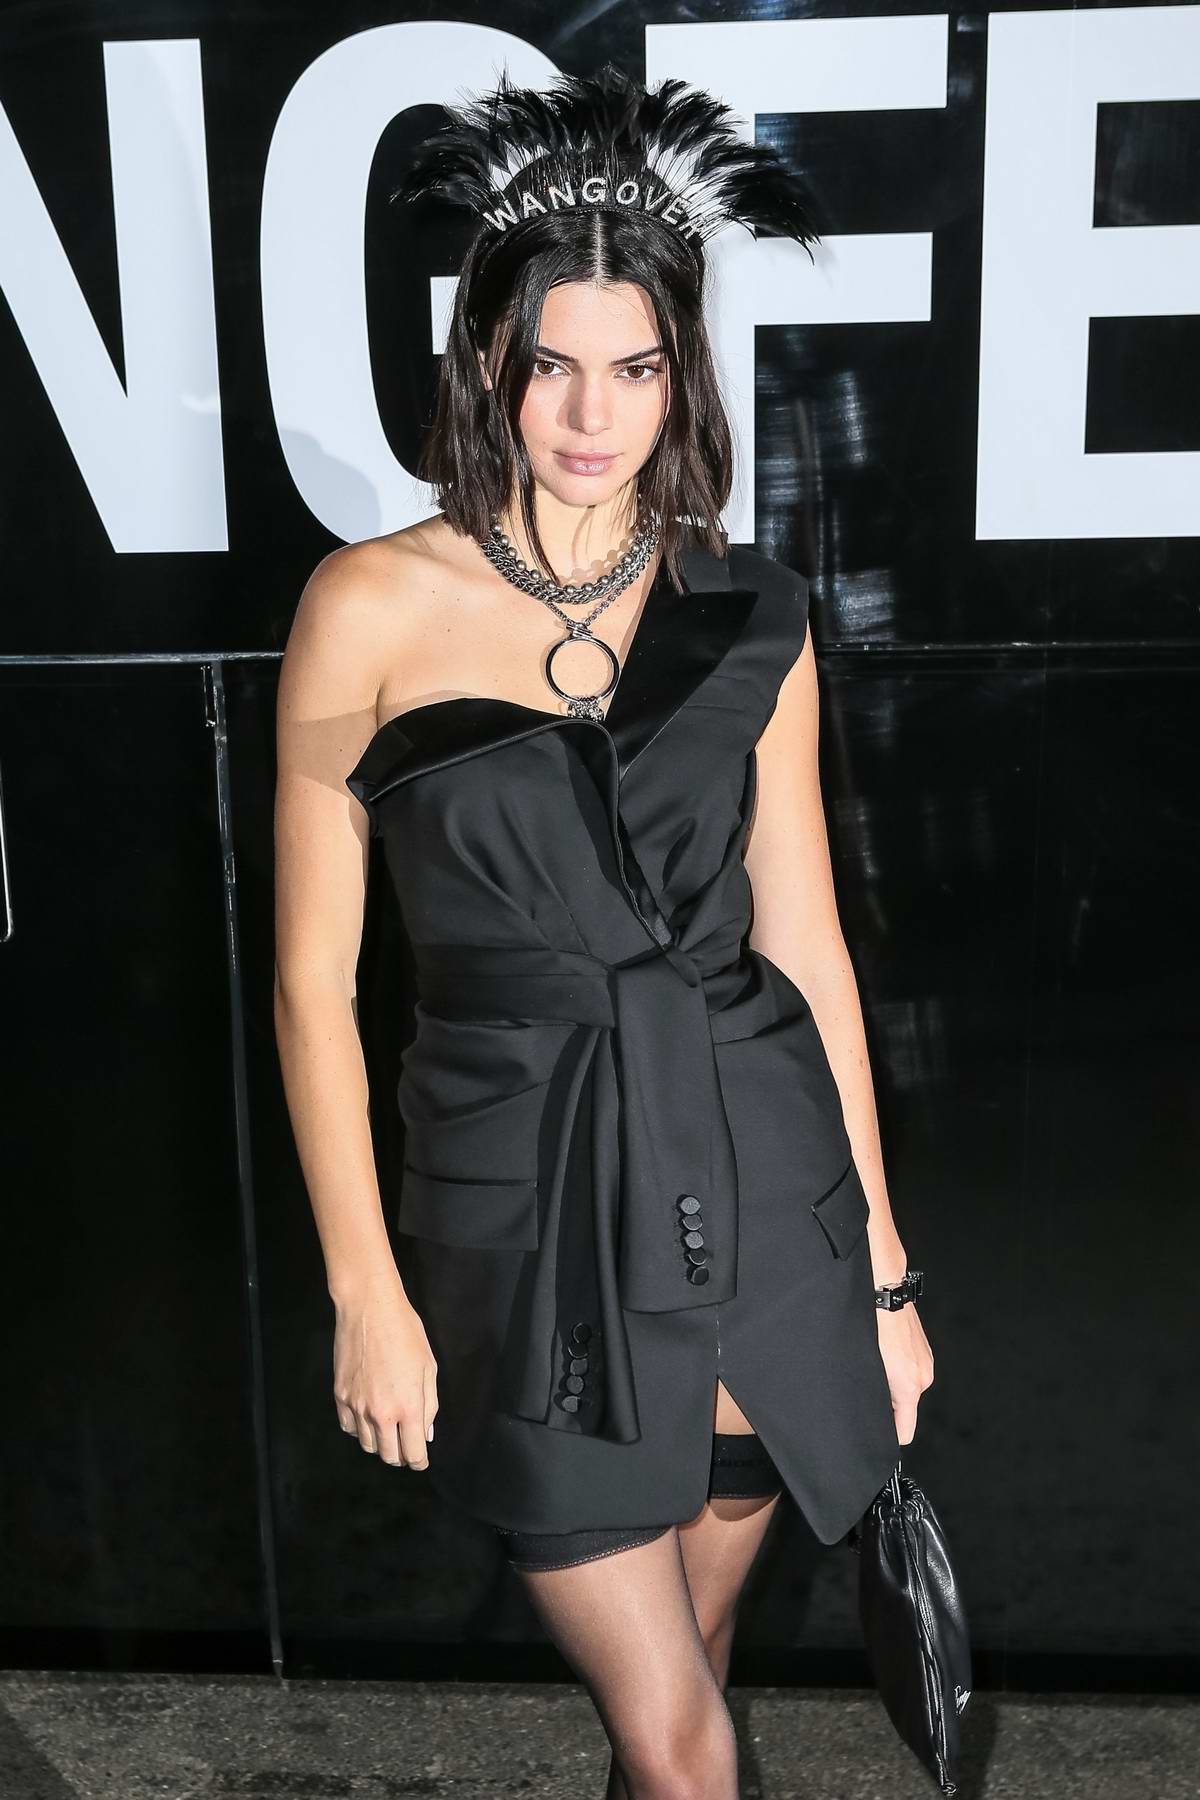 kendall jenner attends the alexander wang show during new york fashion  week-090917_5